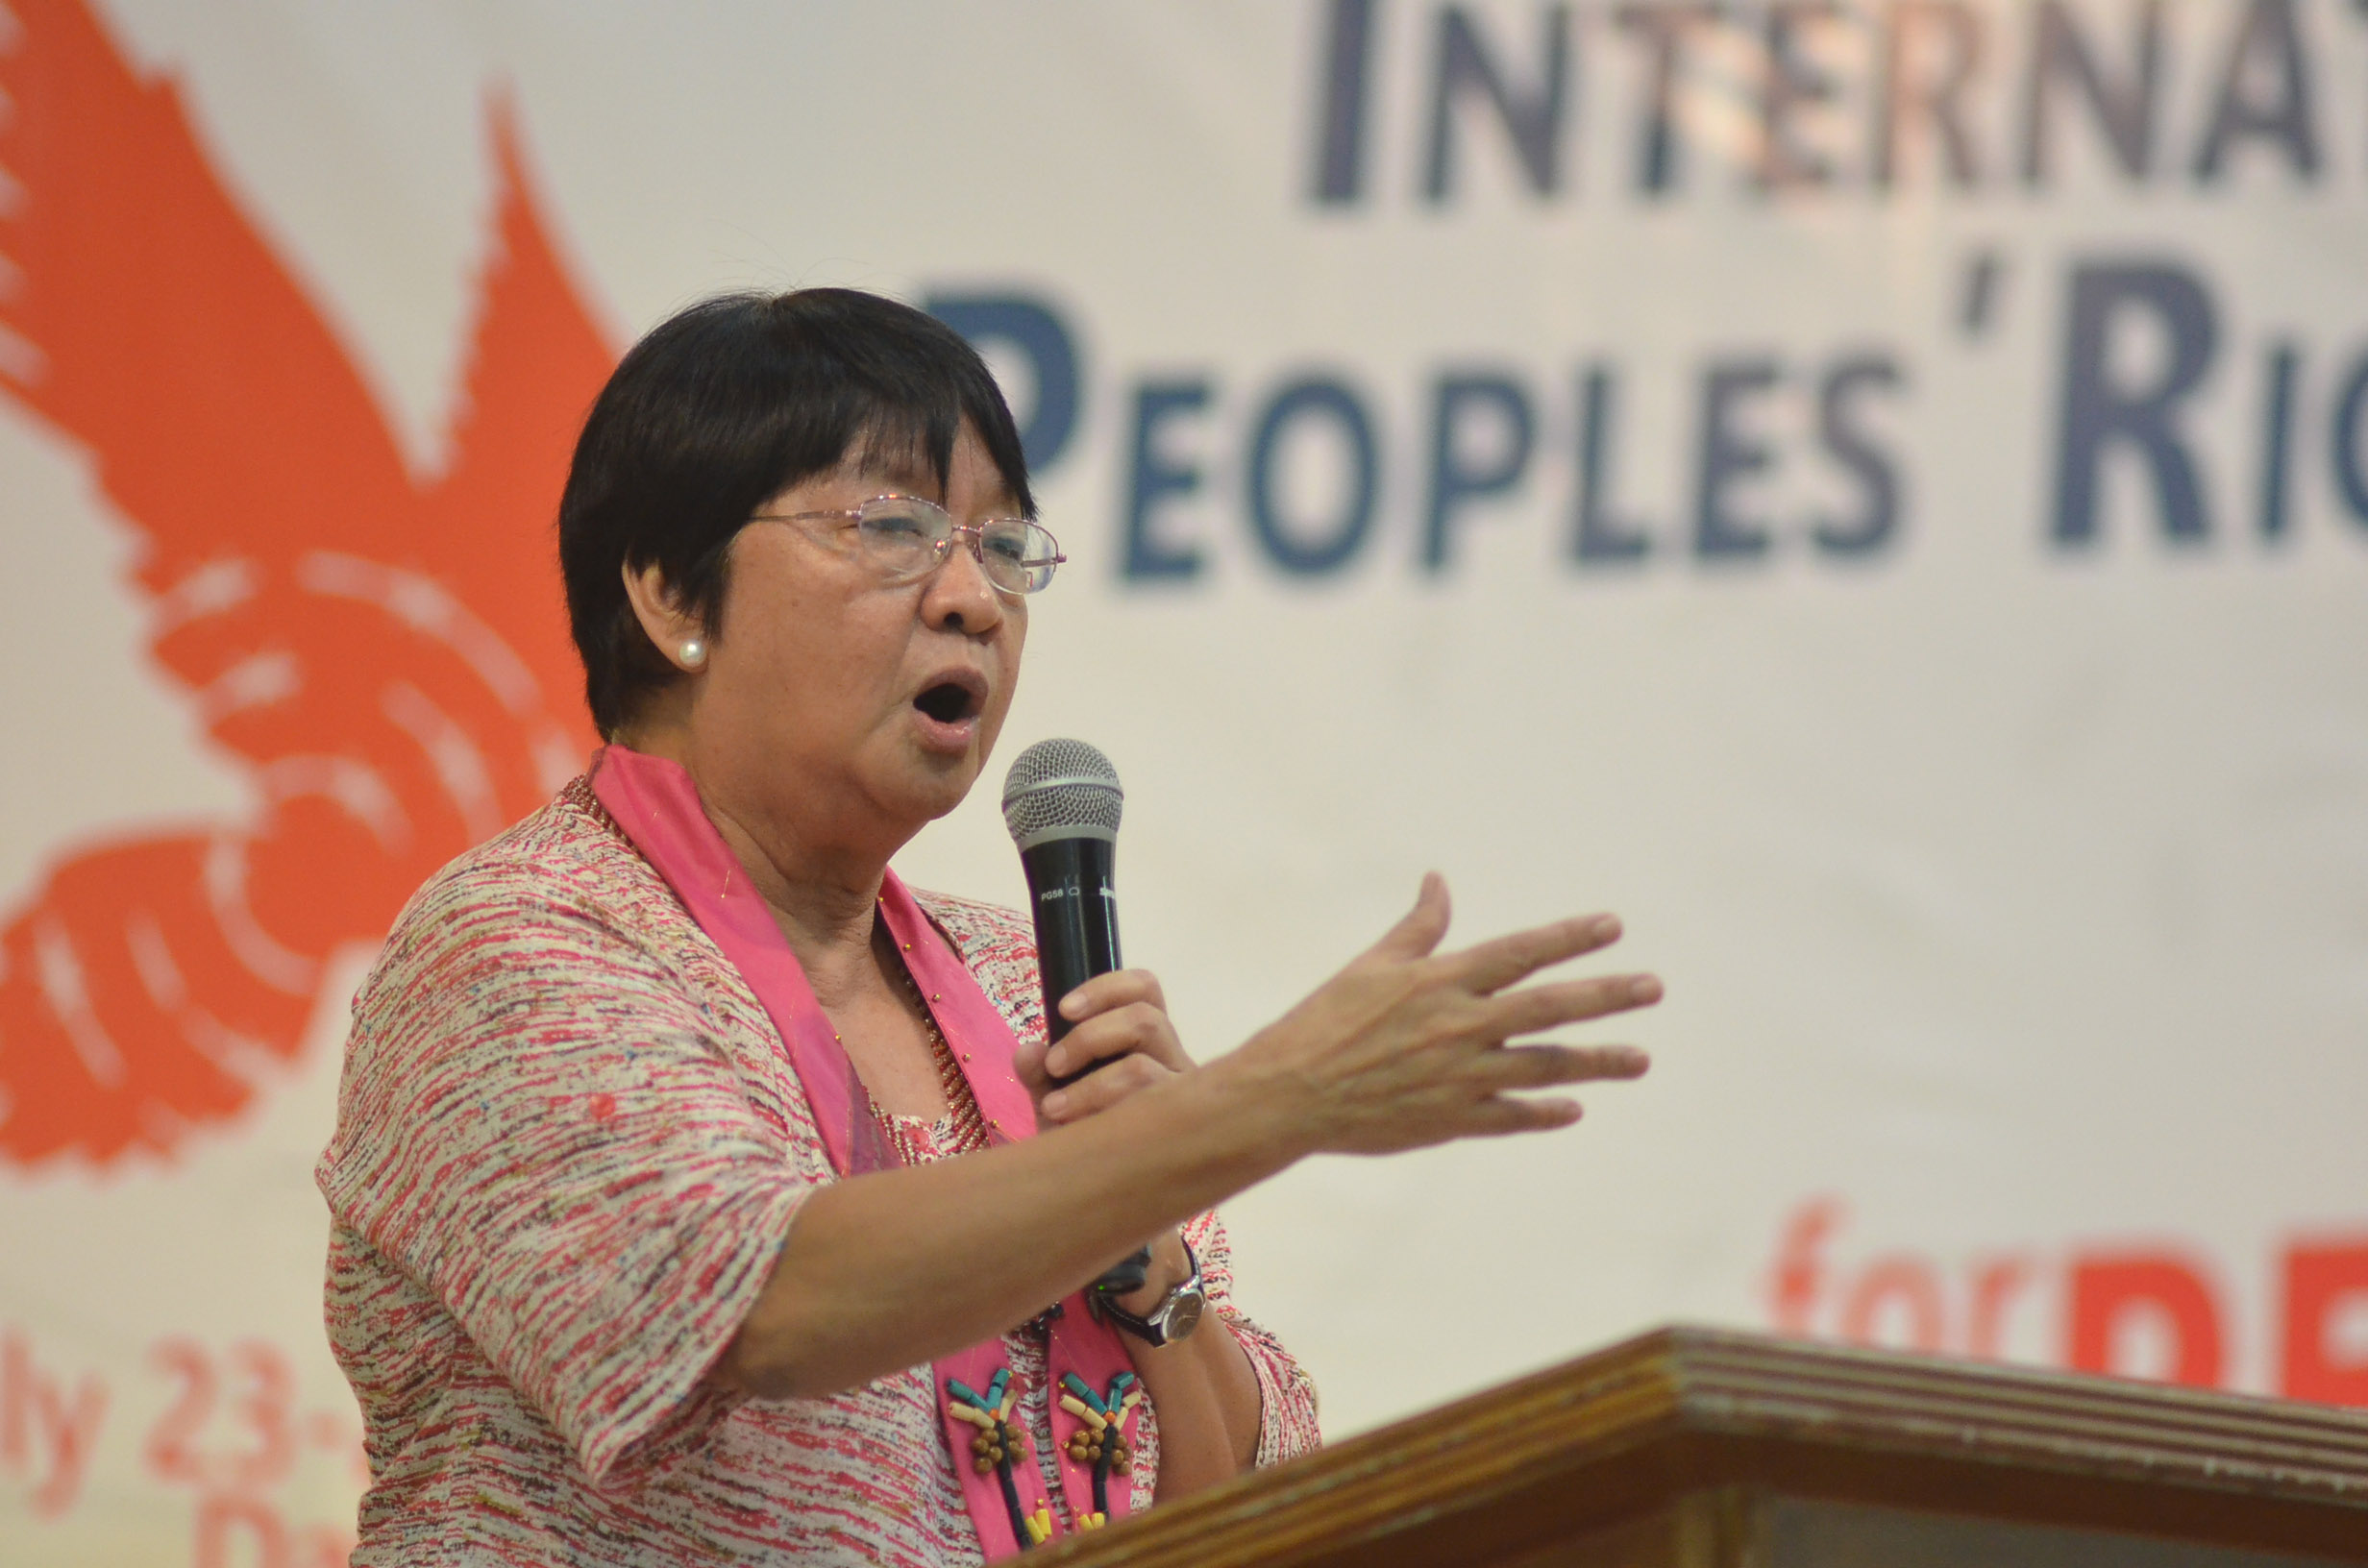 DSWD SECRETARY. Social Welfare and Development Secretary Judy Taguiwalo, speaks during the first day of the International Conference for People's Rights in the Philippines held at the Brokenshire Convention Center in Davao City on Saturday, July 23.
[caption id=